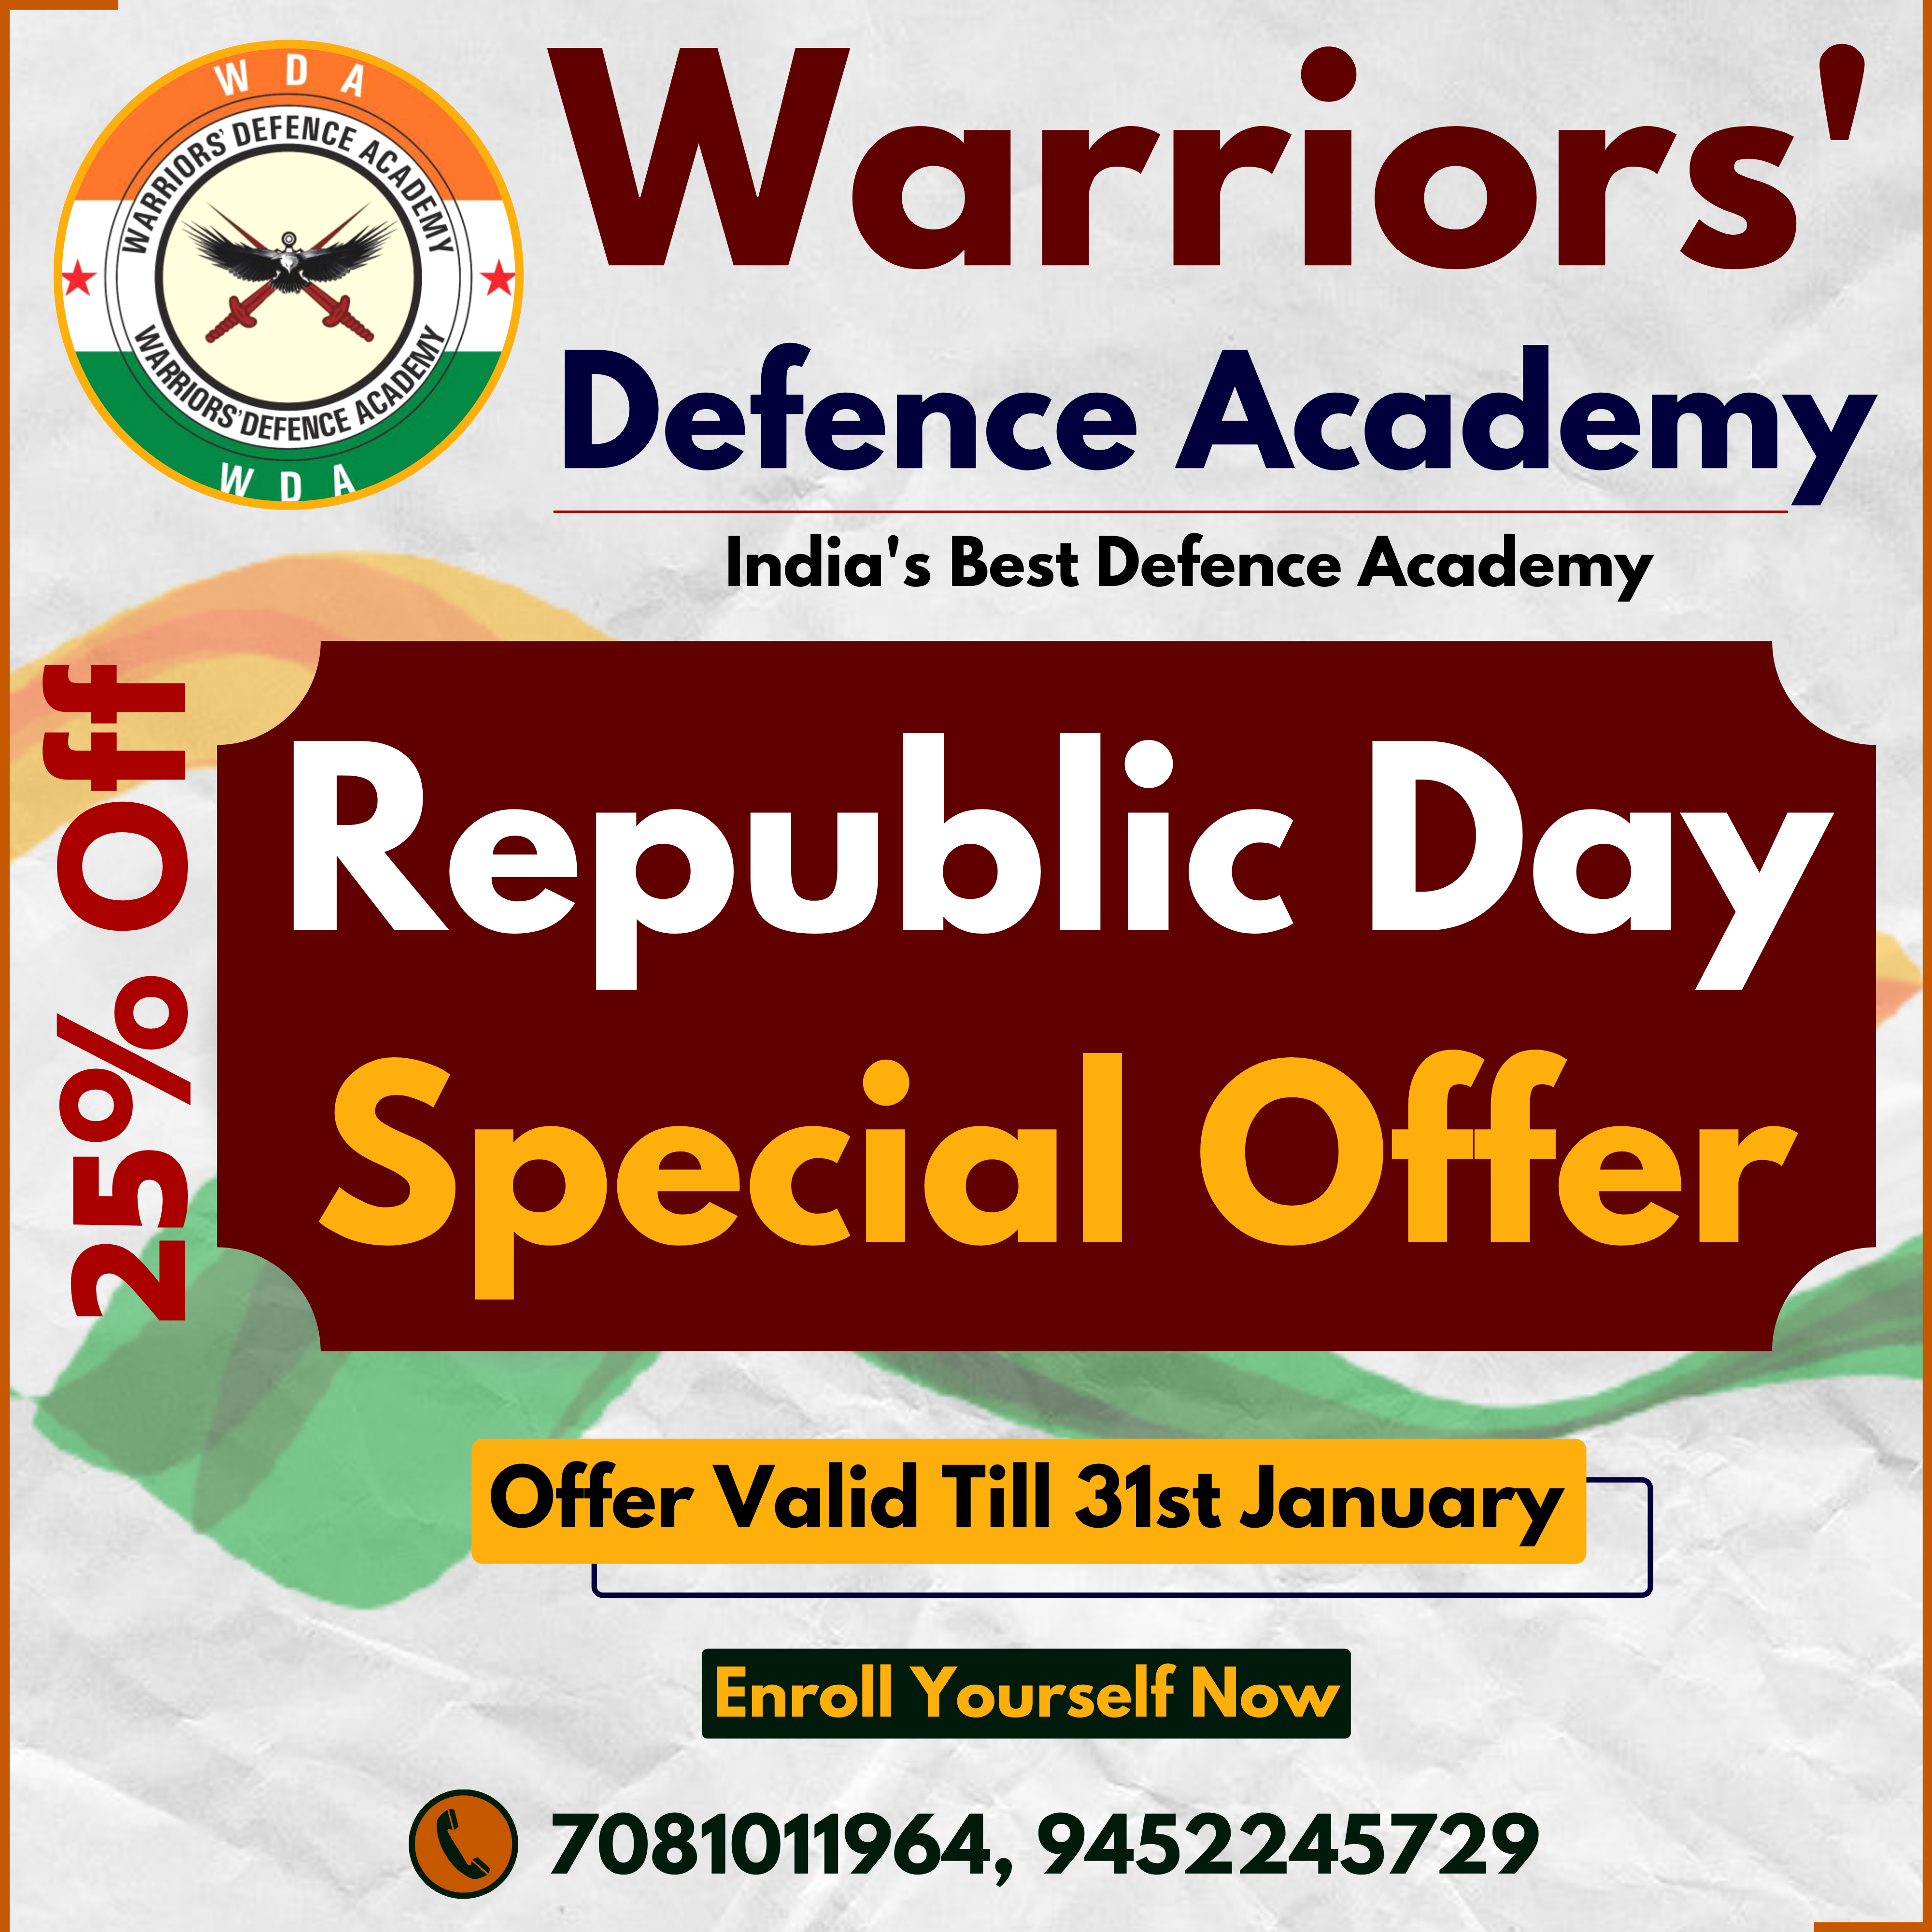 Happy Republic Day 2022 Wishes | Warriors Defence Academy